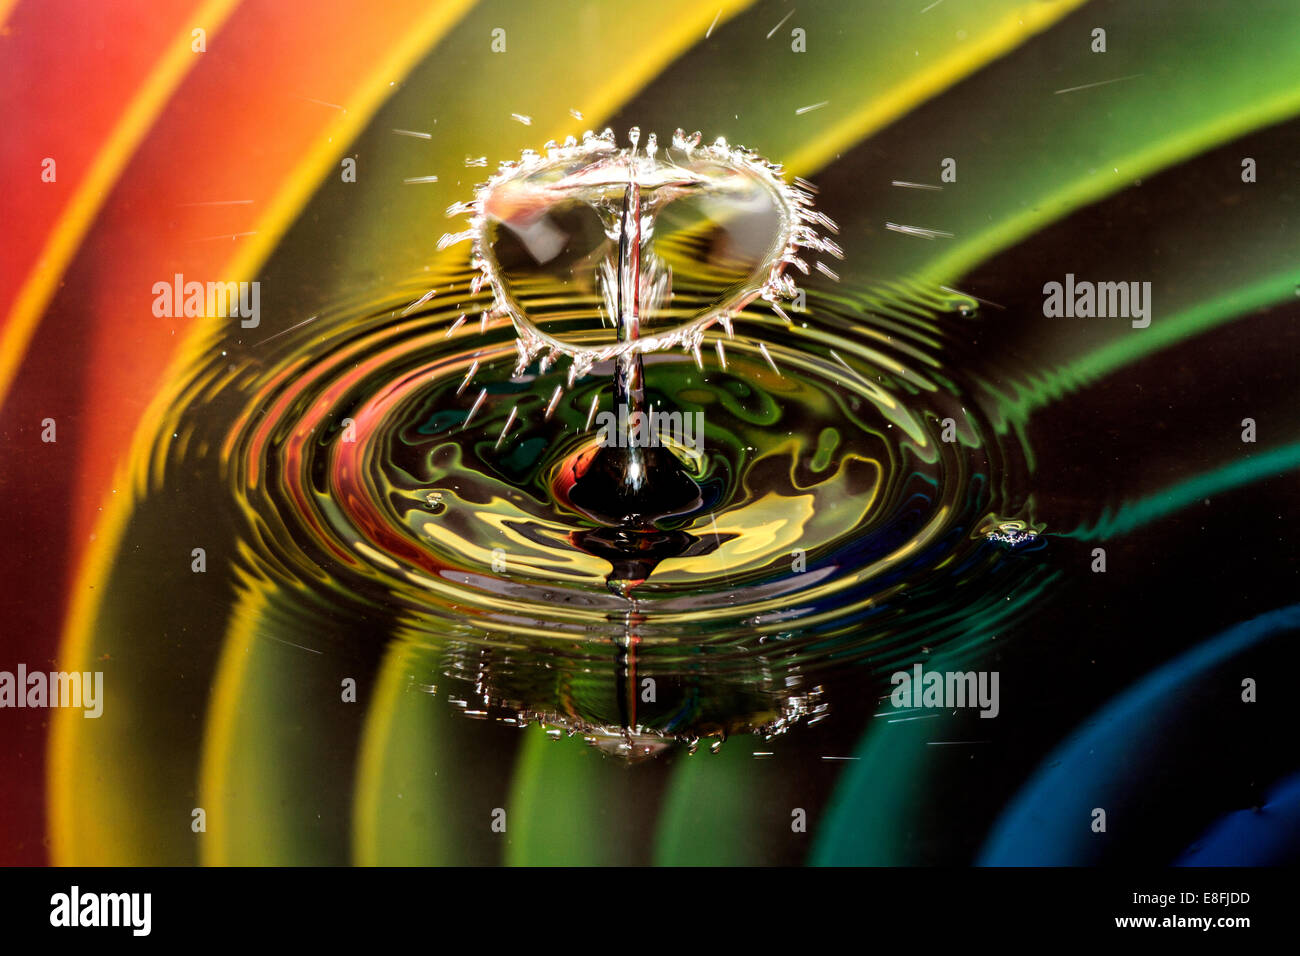 Water drops on bubble with rainbow background Stock Photo